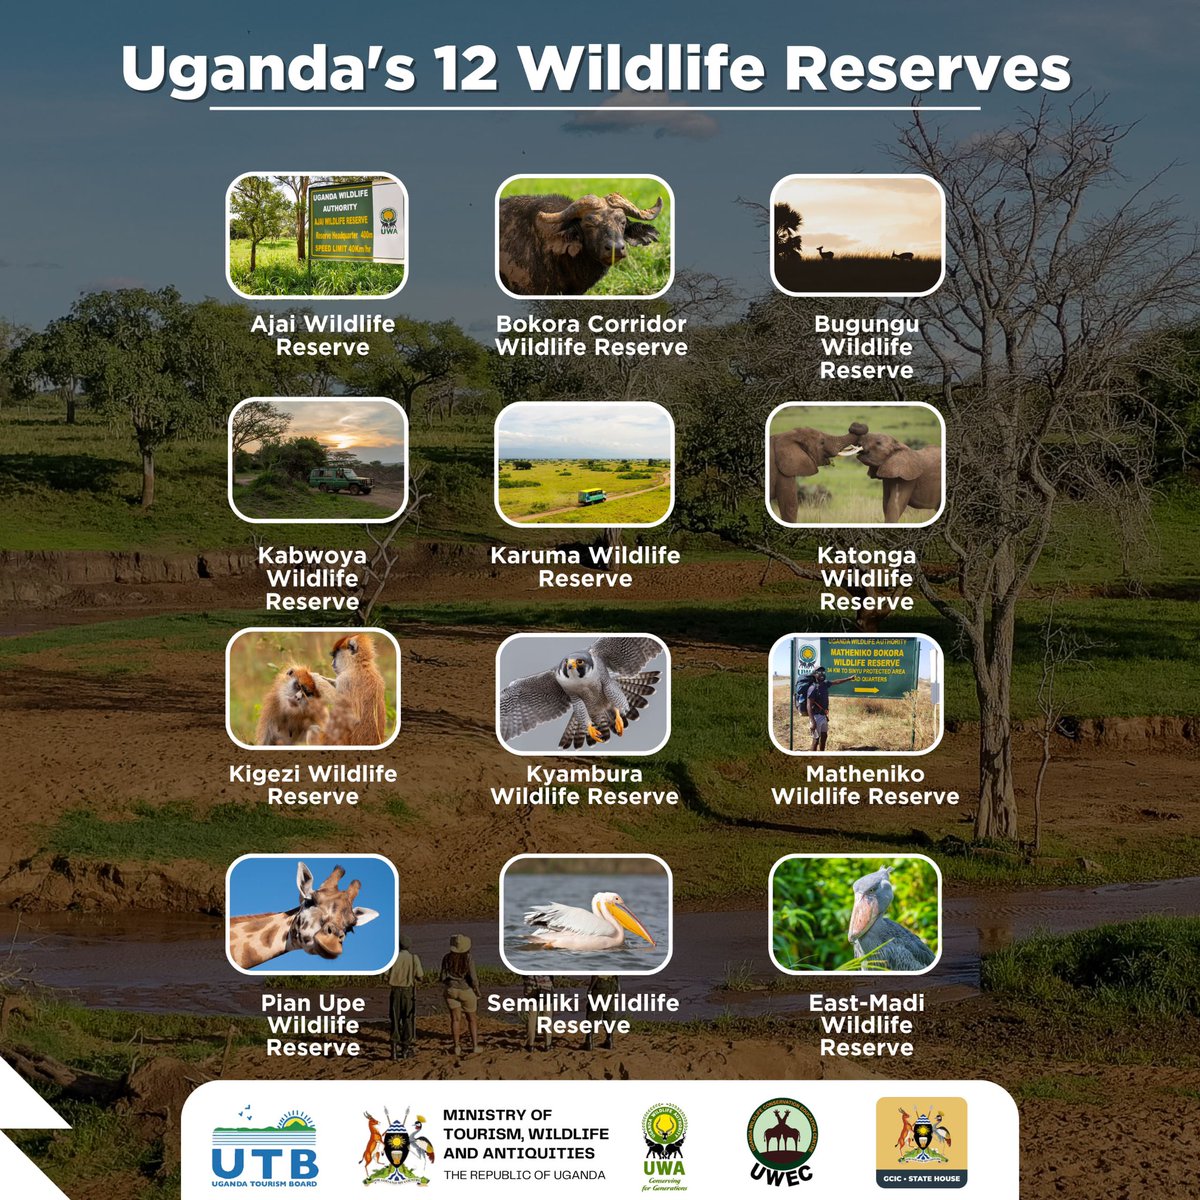 Did you know? In addition to Uganda’s celebrated 10 National Parks, the country boasts an impressive network of wildlife reserves spread across the country, some spanning even larger areas, each a haven for a variety of plant and animal species. #ExploreUganda